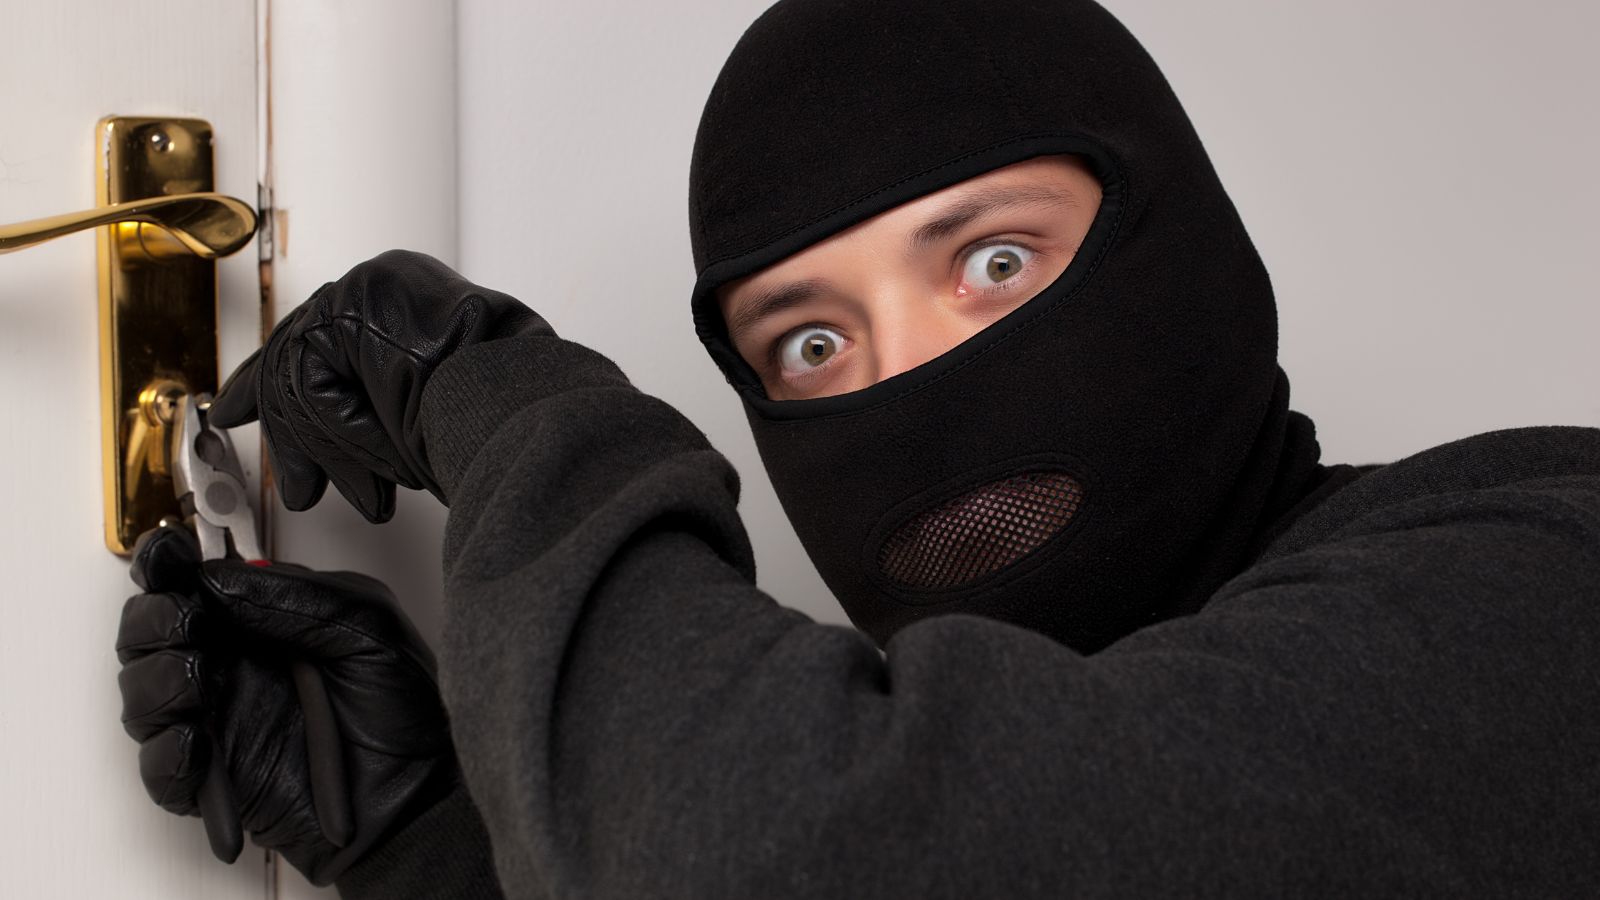 Burglar Hotspots! 18 Common Hiding Spots They Check First for Your Valuables